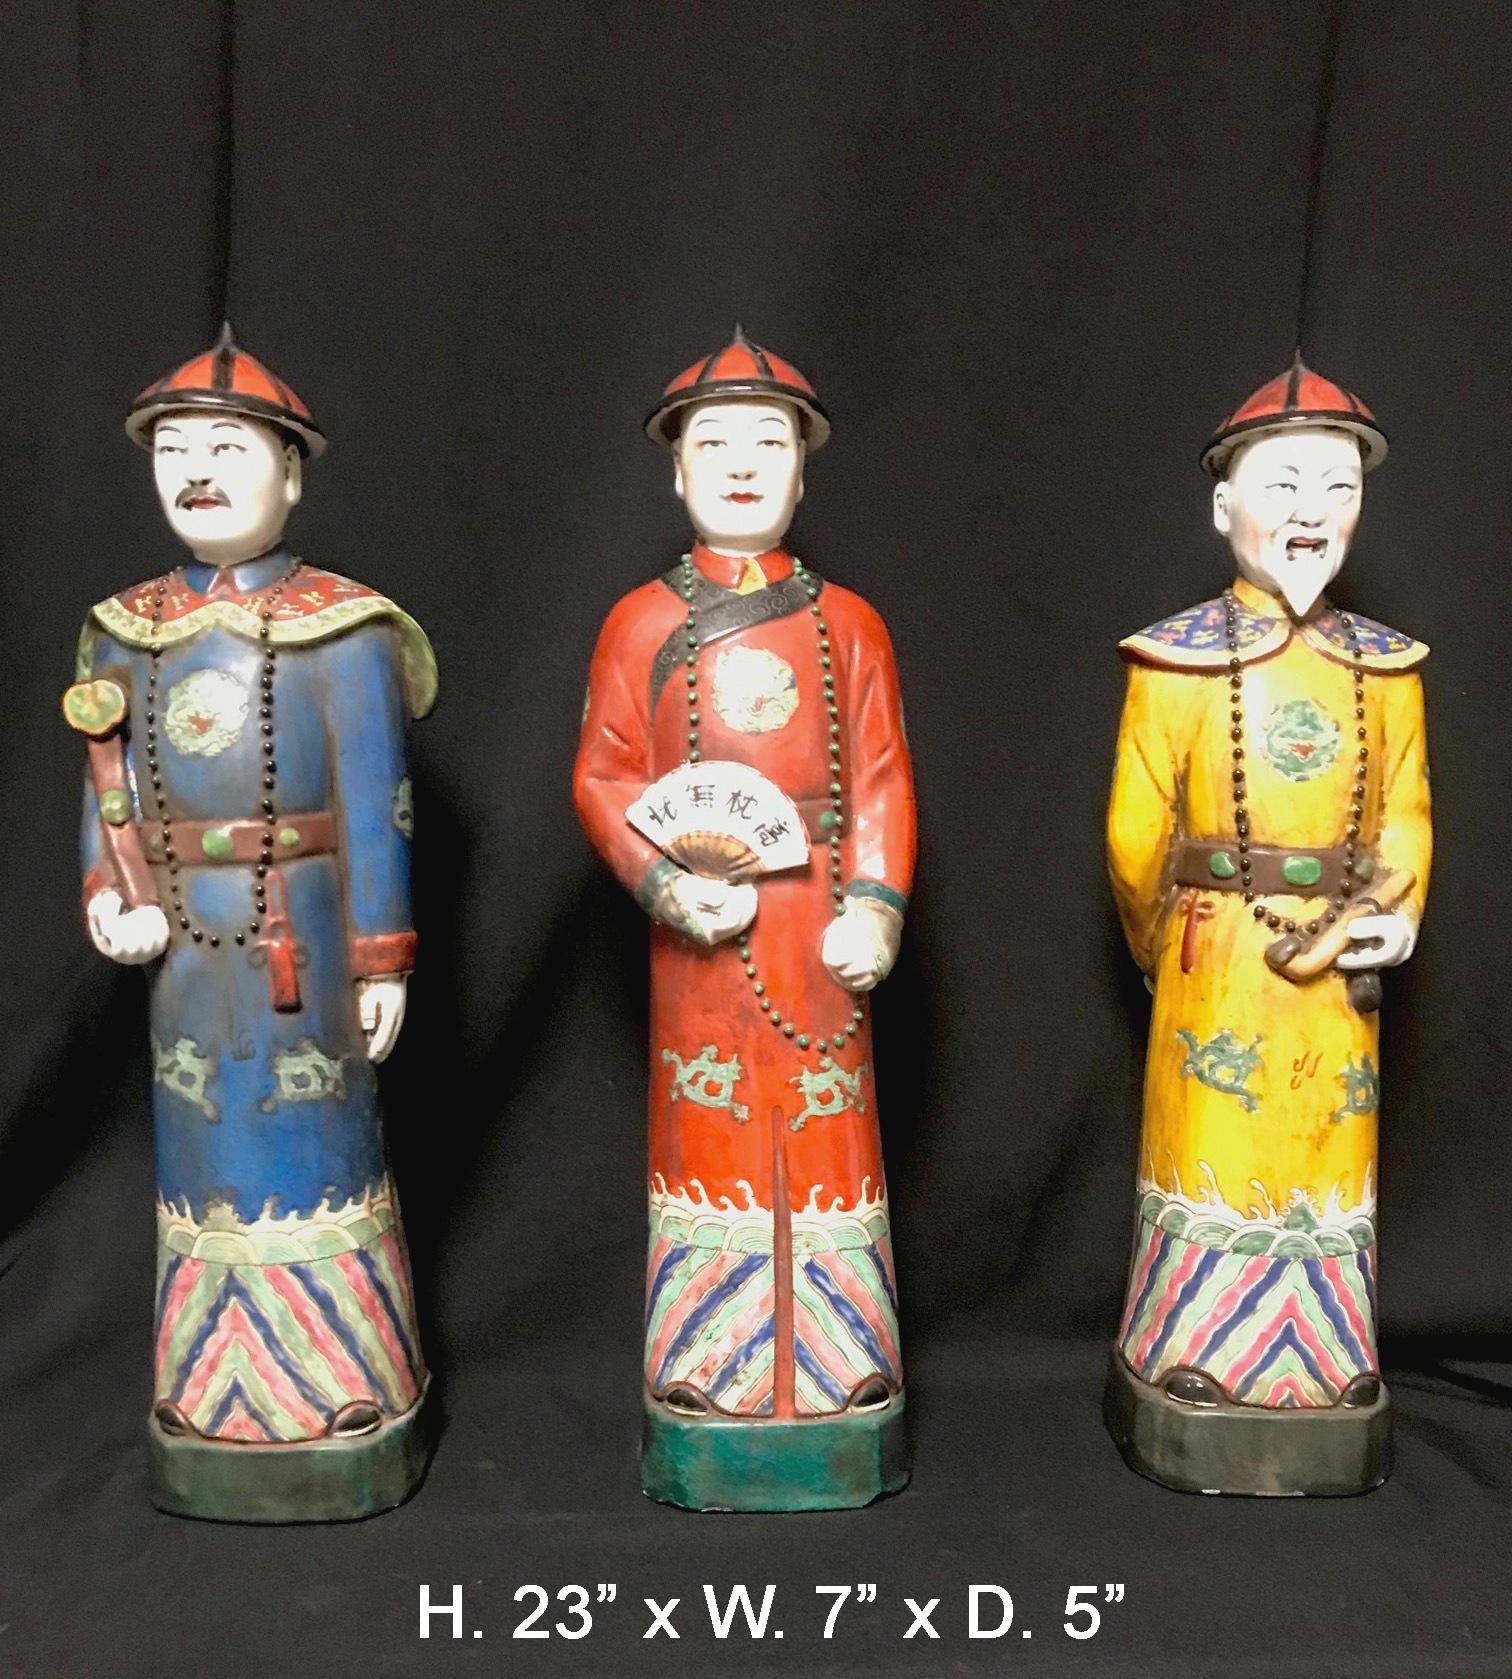 Attractive set of three Chinese hand painted porcelain figures of the three Immortals and dressed in traditional garments and hats,
Second half of the 20th century.

Each fully poly-chromed and paint-decorated.